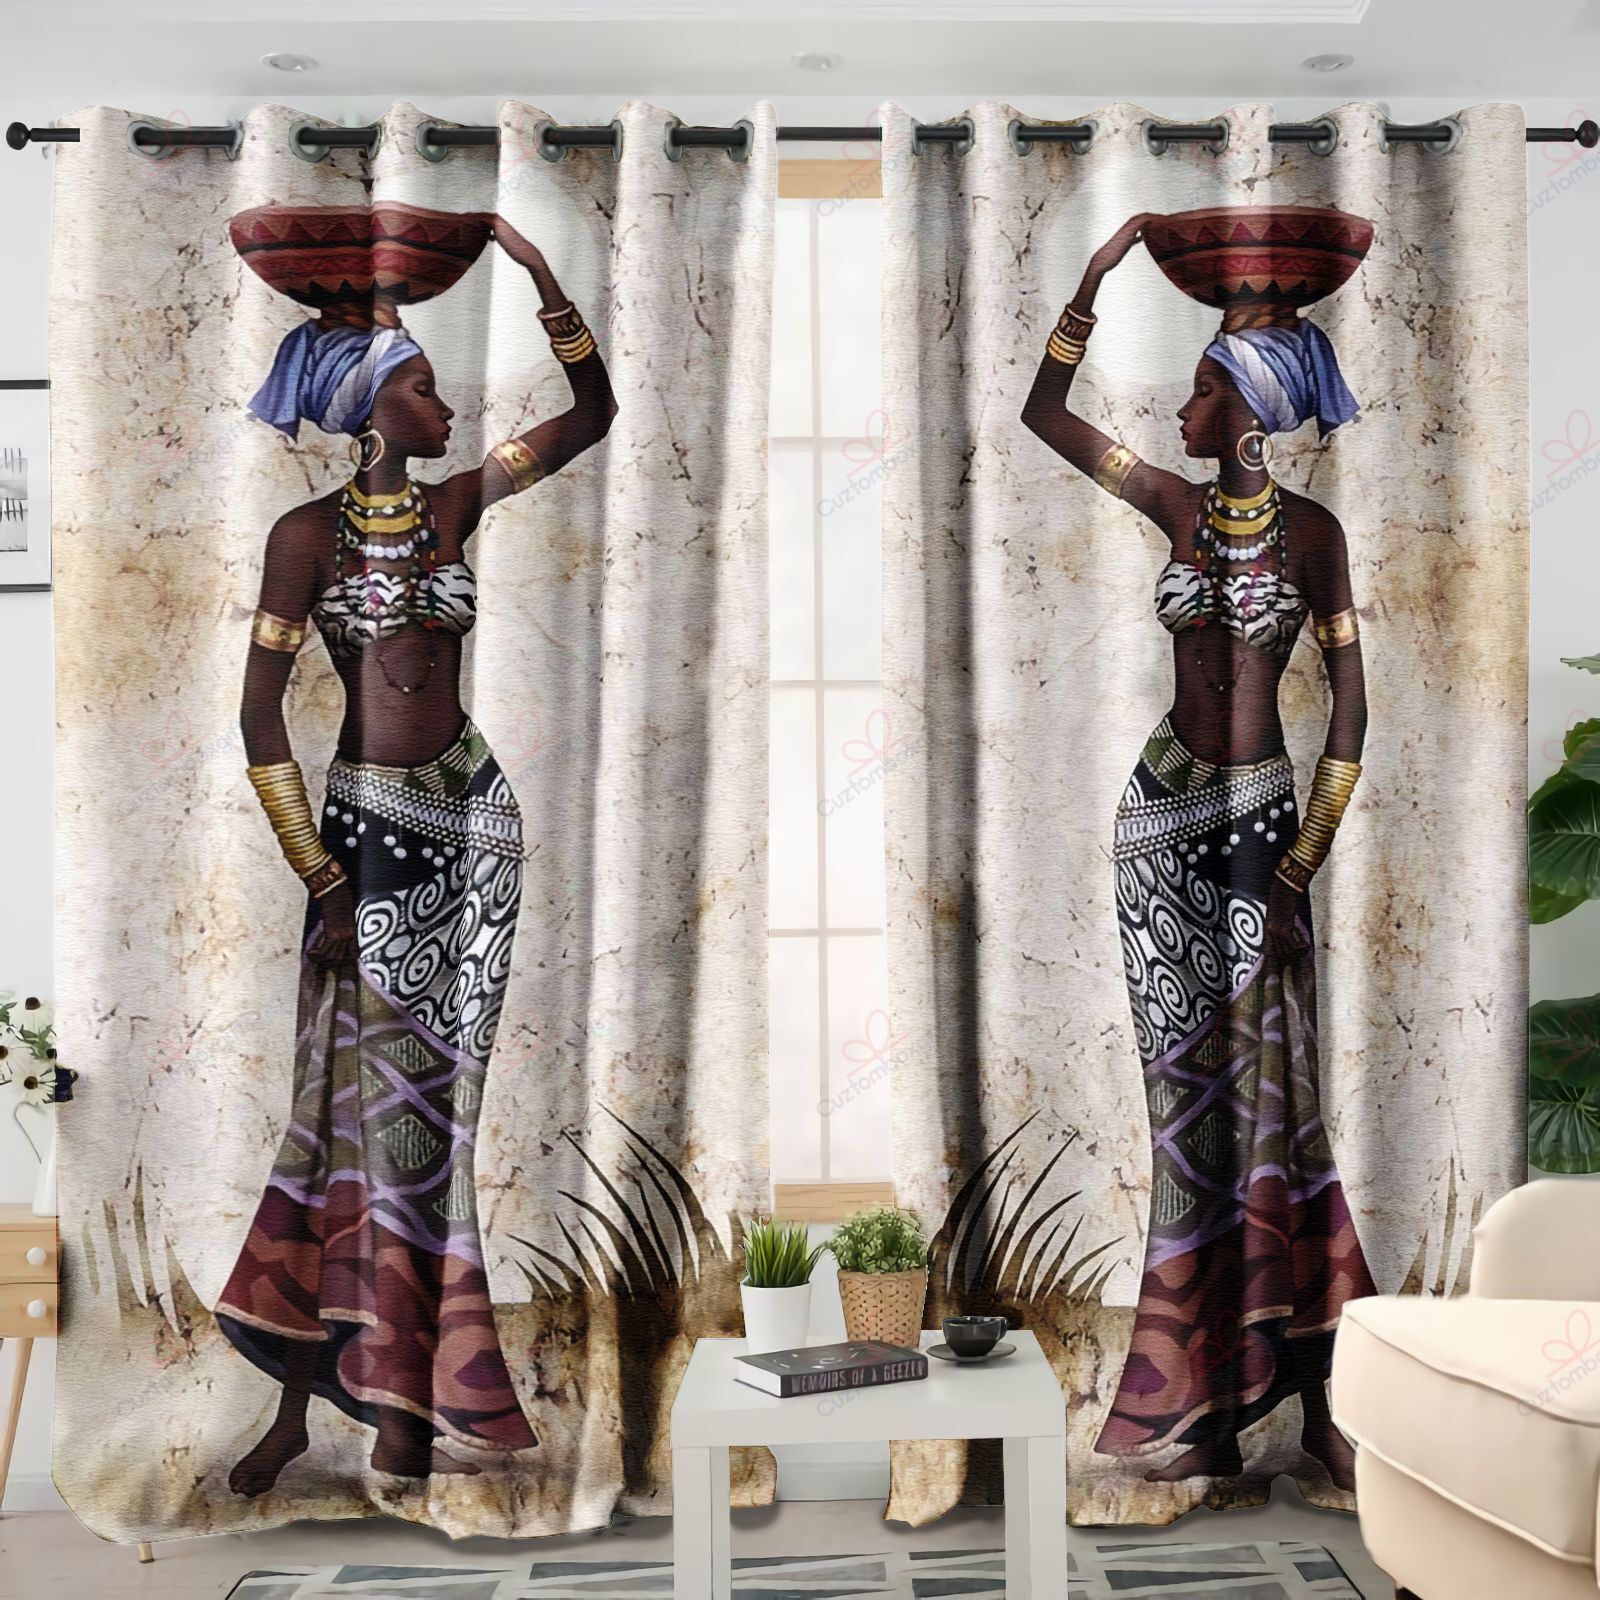 The Beauty Of African Woman Printed Window Curtain Home Decor